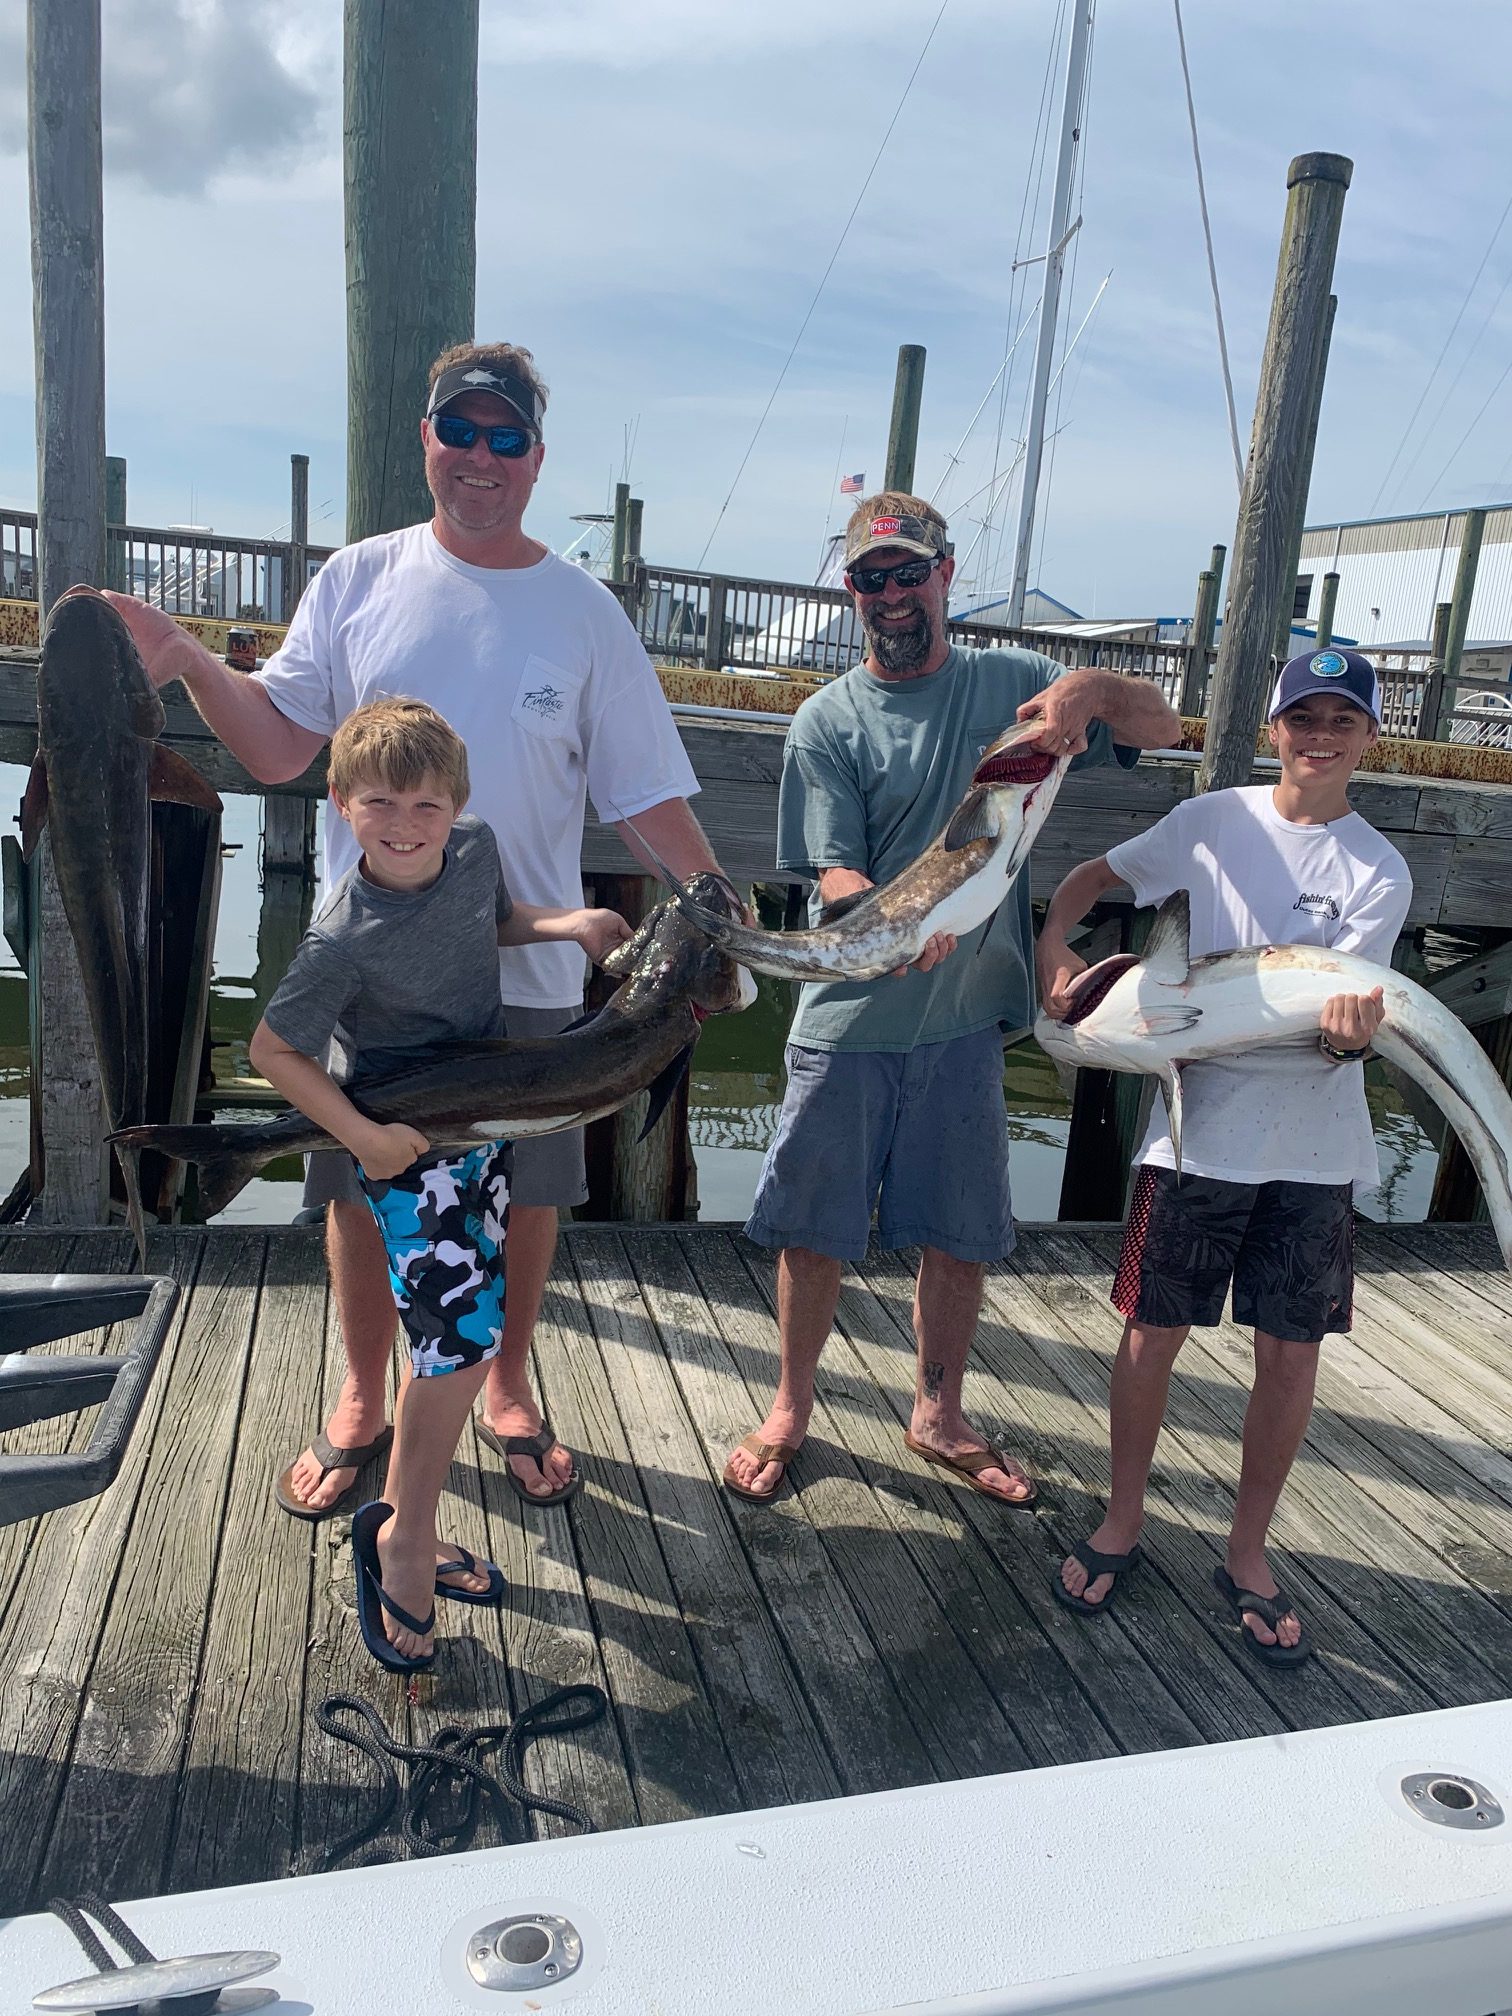 Bobs bait & Tackle outer banks charters Oregon inlet.